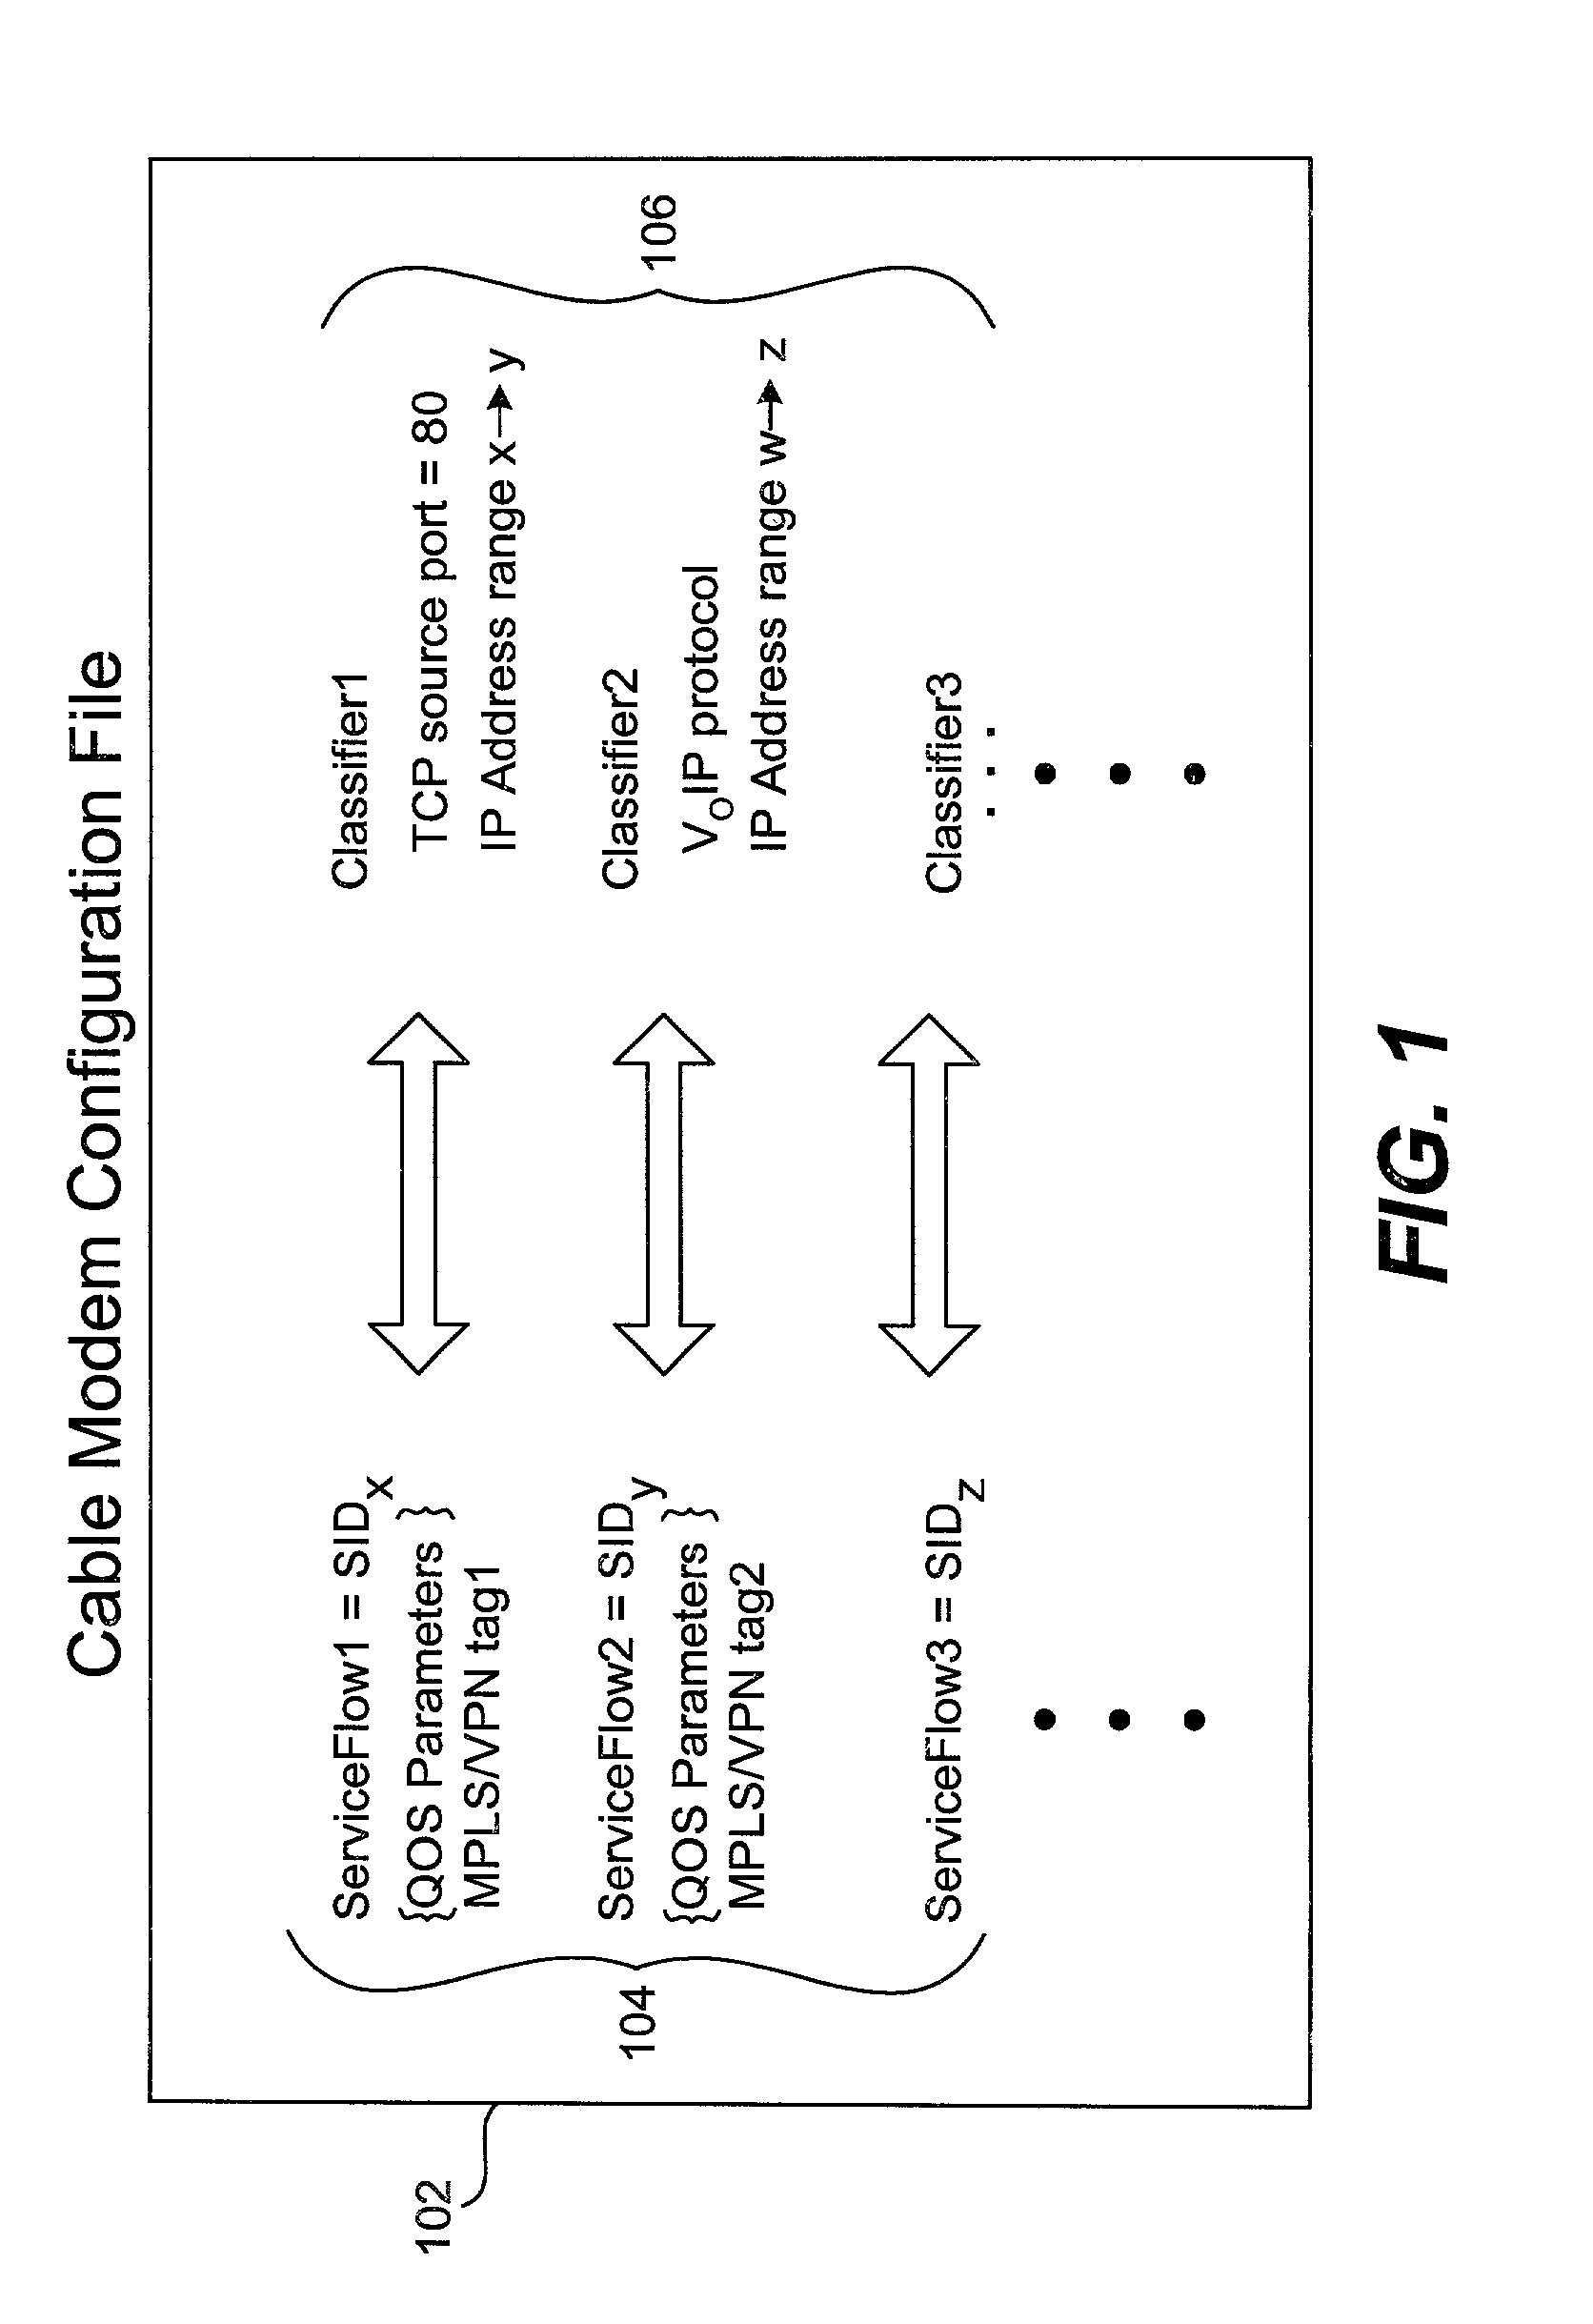 Method and apparatus for mapping an MPLS tag to a data packet in a headend